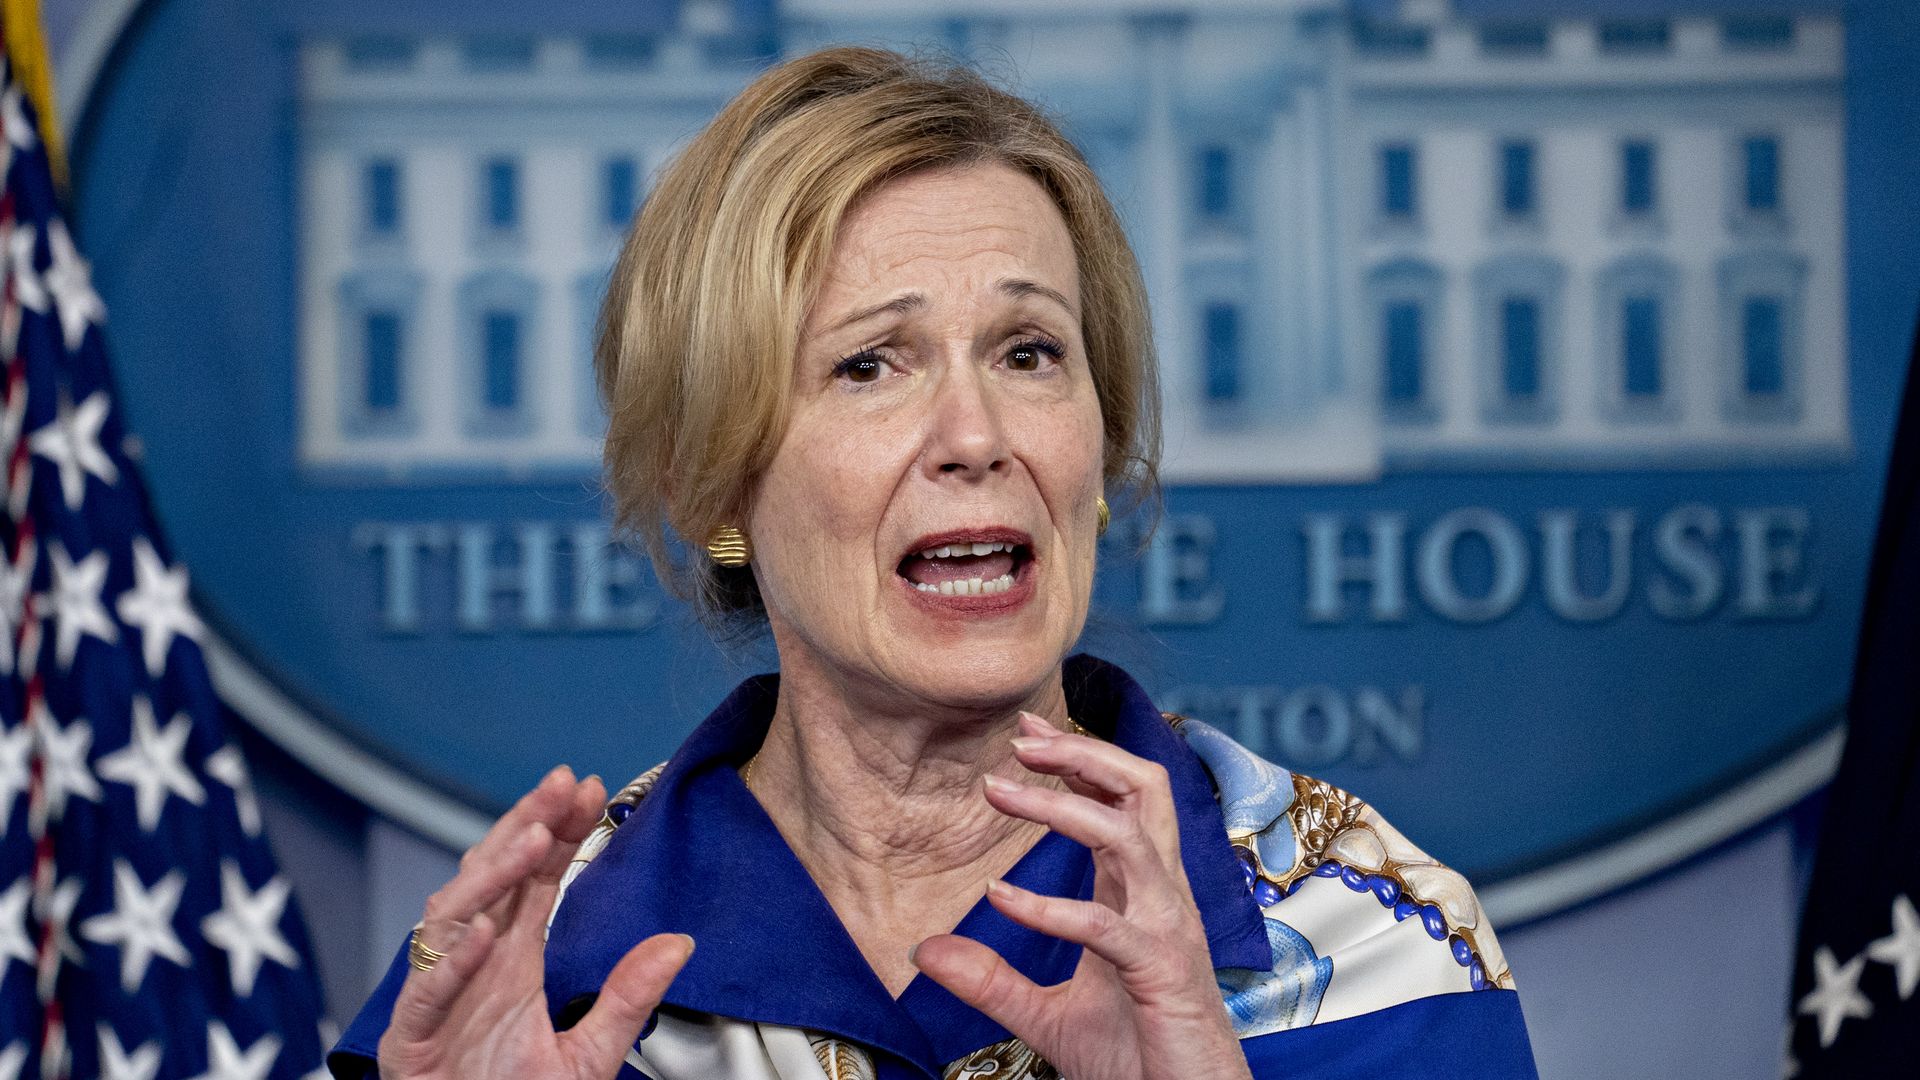 Deborah Birx, the-then coronavirus response coordinator, speaks during a news conference in the the White House in Washington, D.C., U.S., on Friday, May 22, 2020.